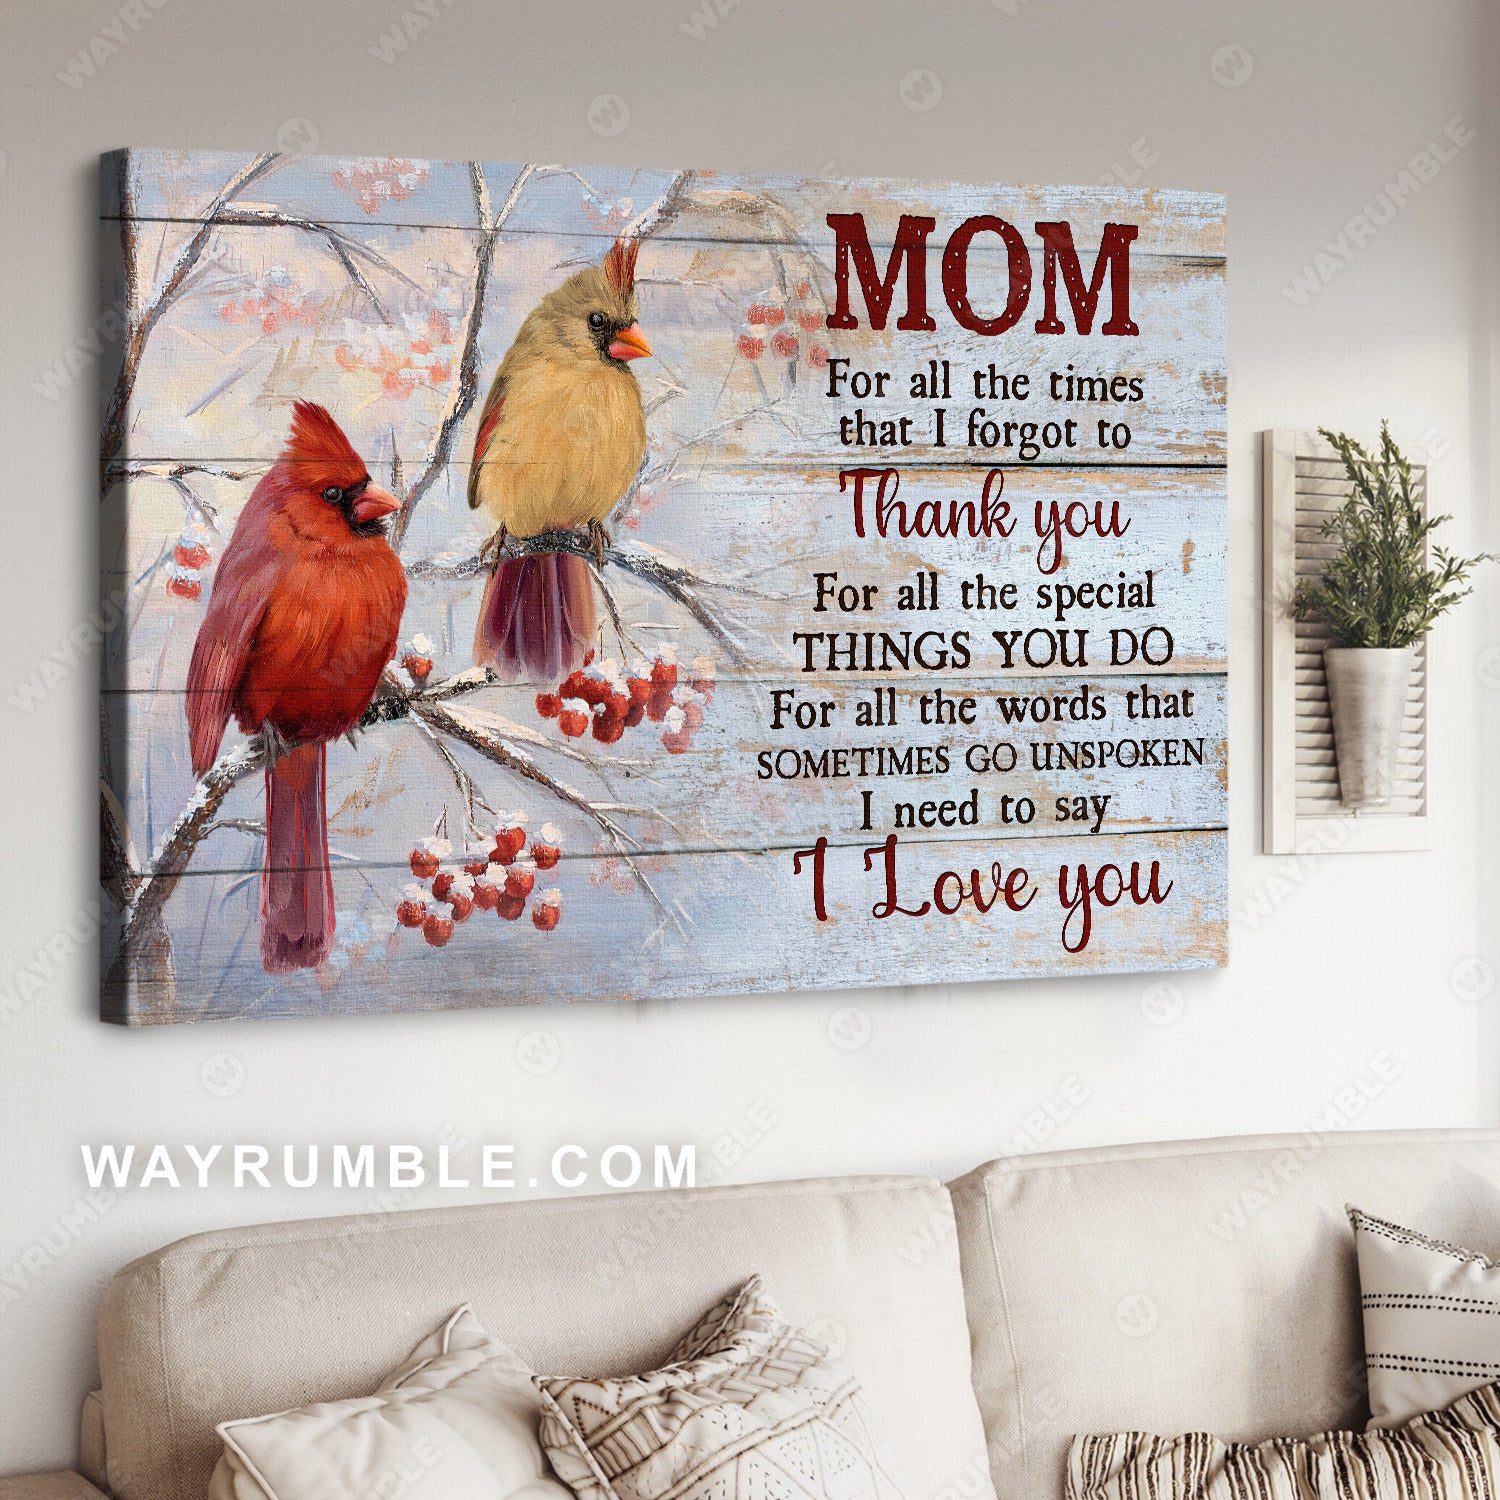 Daughter to mom, Cardinal drawing, I need to say I love you - Family Landscape Canvas Prints, Wall Art